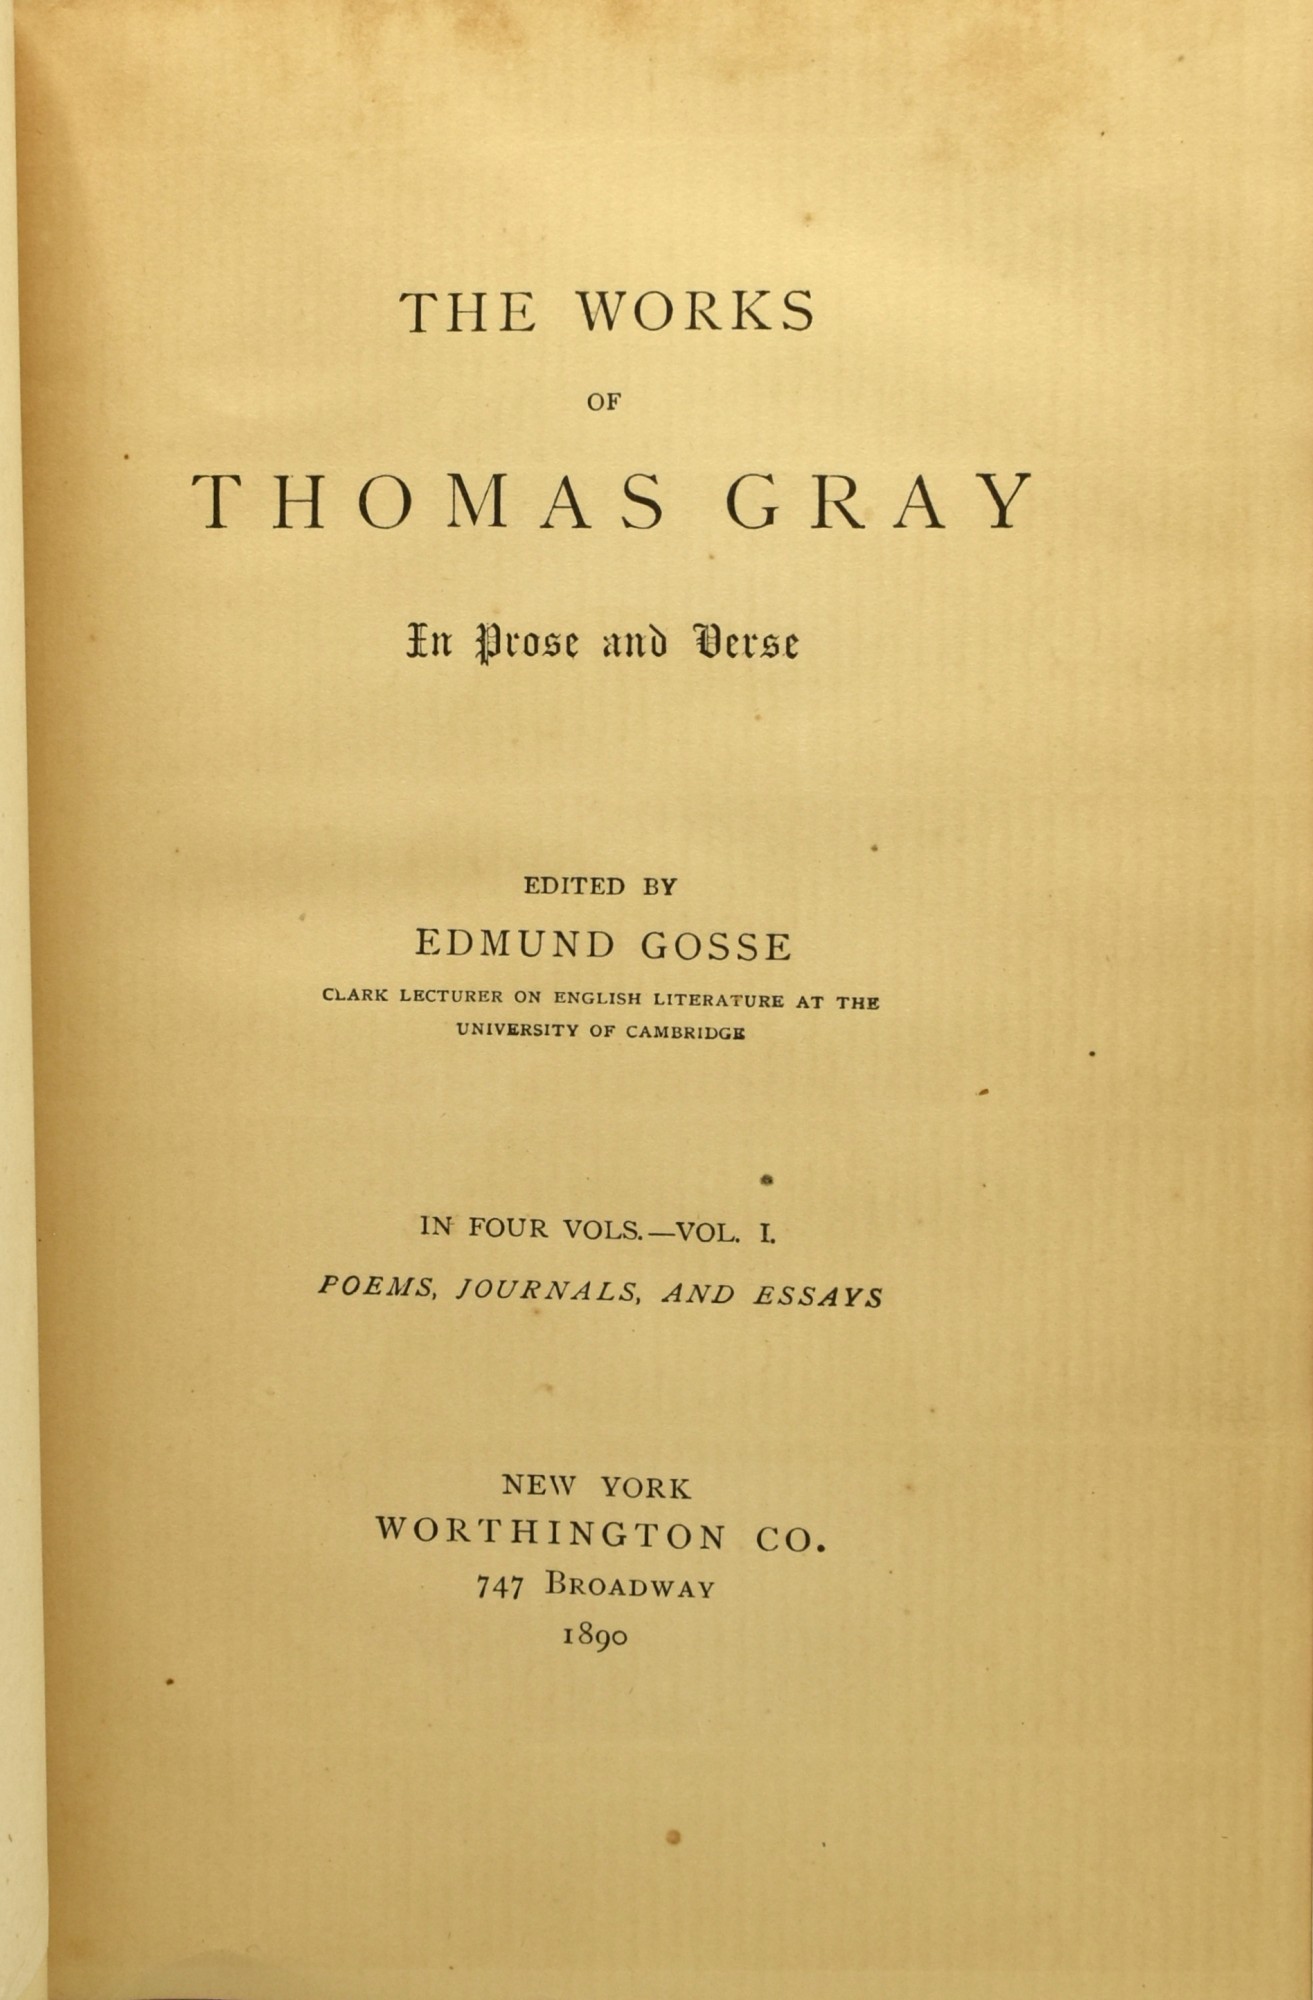 POETRY] THE WORKS OF THOMAS GRAY IN PROSE AND VERSE (4 VOLUMES) by Thomas  Gray | Edmund Gosse [Editor]: Very Good binding Hard Cover (1890) Early  Reprint. | BLACK SWAN BOOKS, INC., ABAA, ILAB